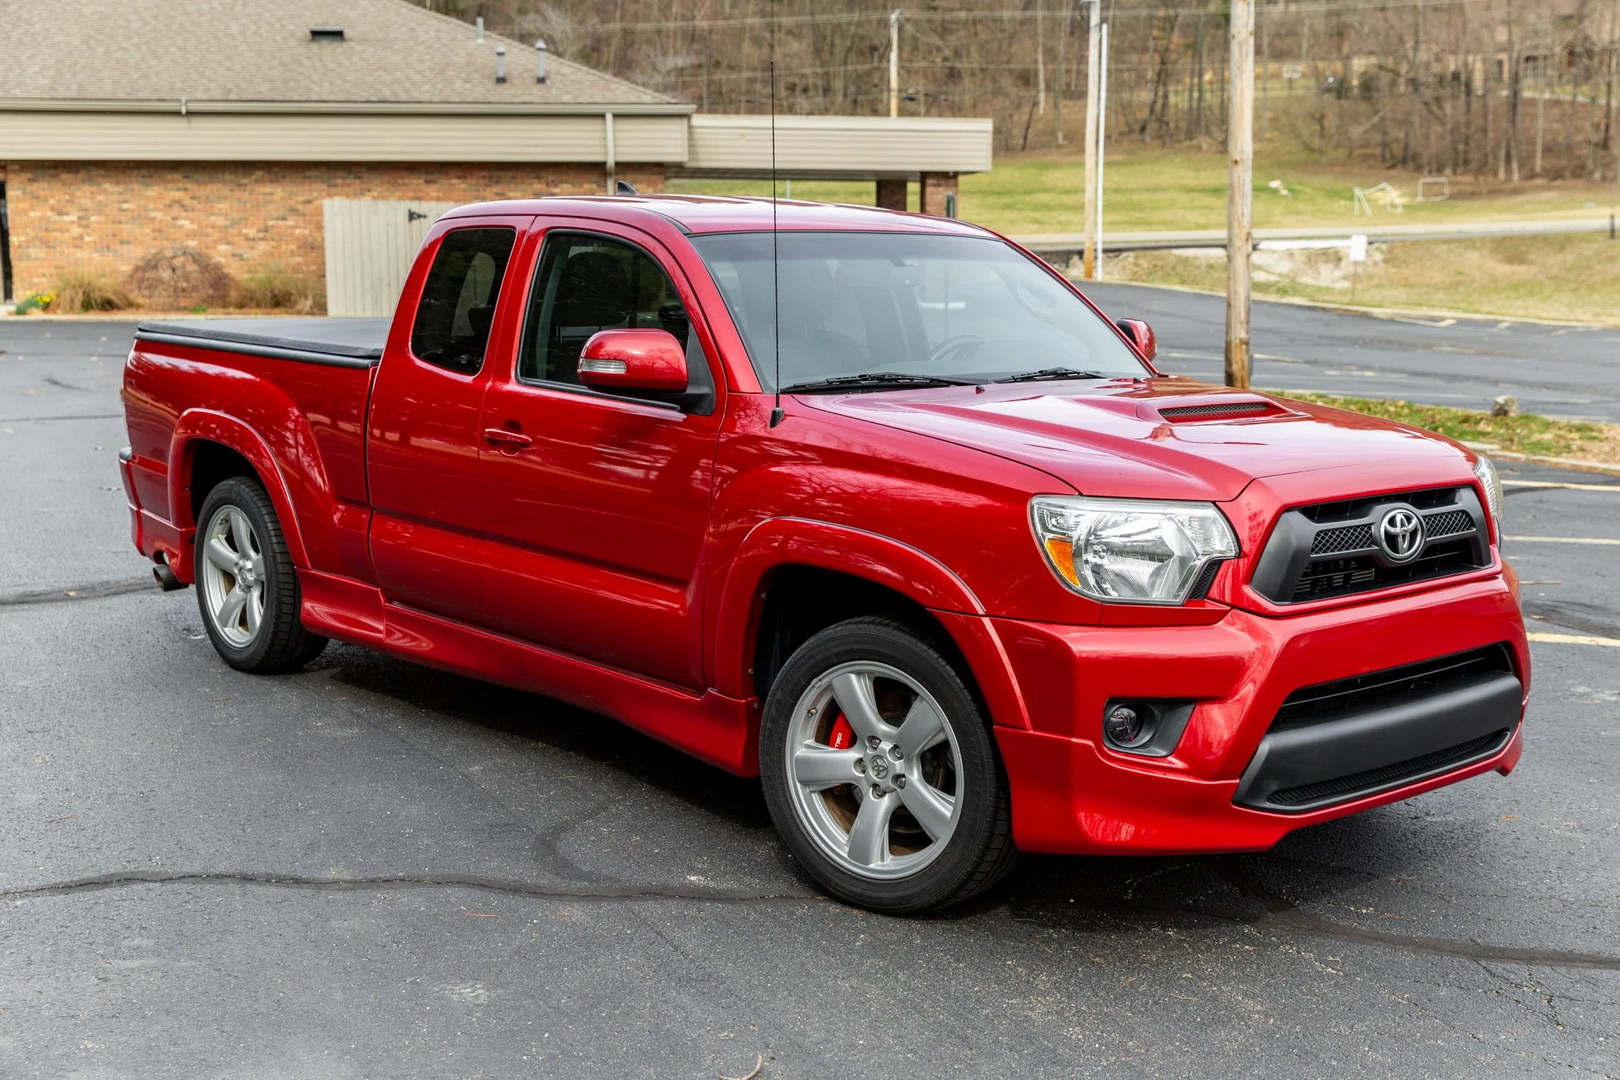 Supercharged 2012 Toyota Tacoma X-Runner Is a Blue-Collar Driver’s Truck - autoevolution